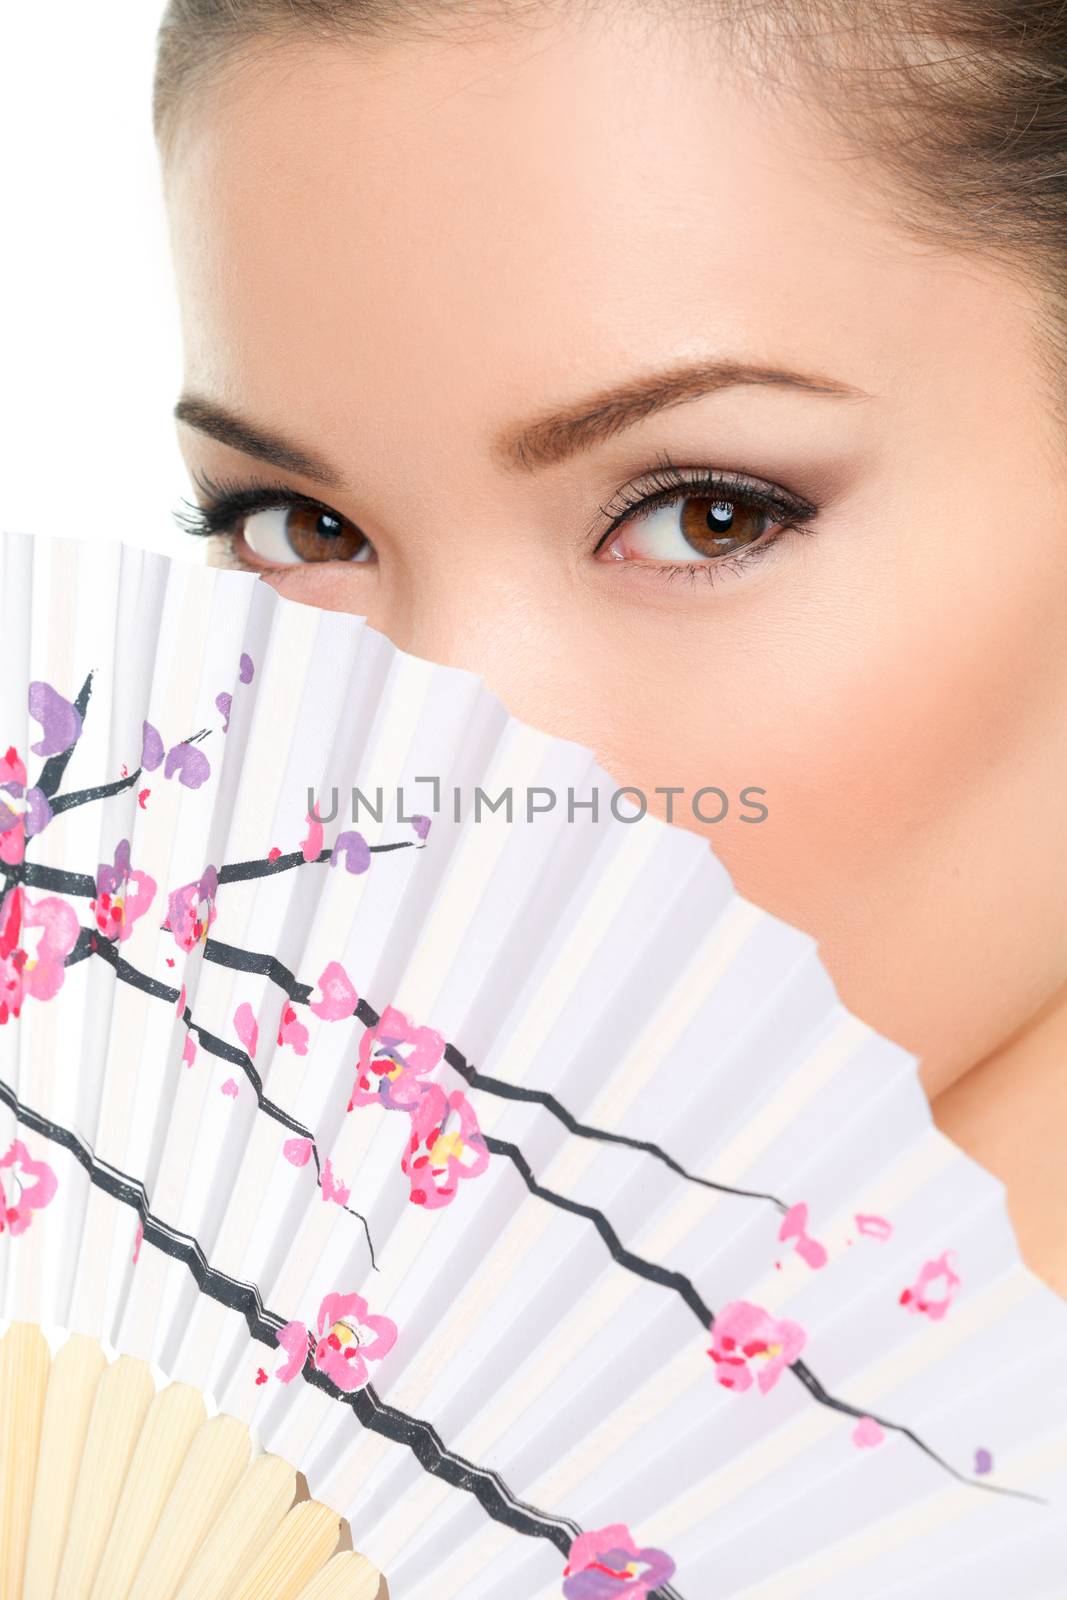 Asian beauty - seductive eyes woman chinese or japanese. Eye makeup Asian look with paper fan. Beauty portrait of mixed race Asian / Caucasian female model on white background. Close up on eyes.